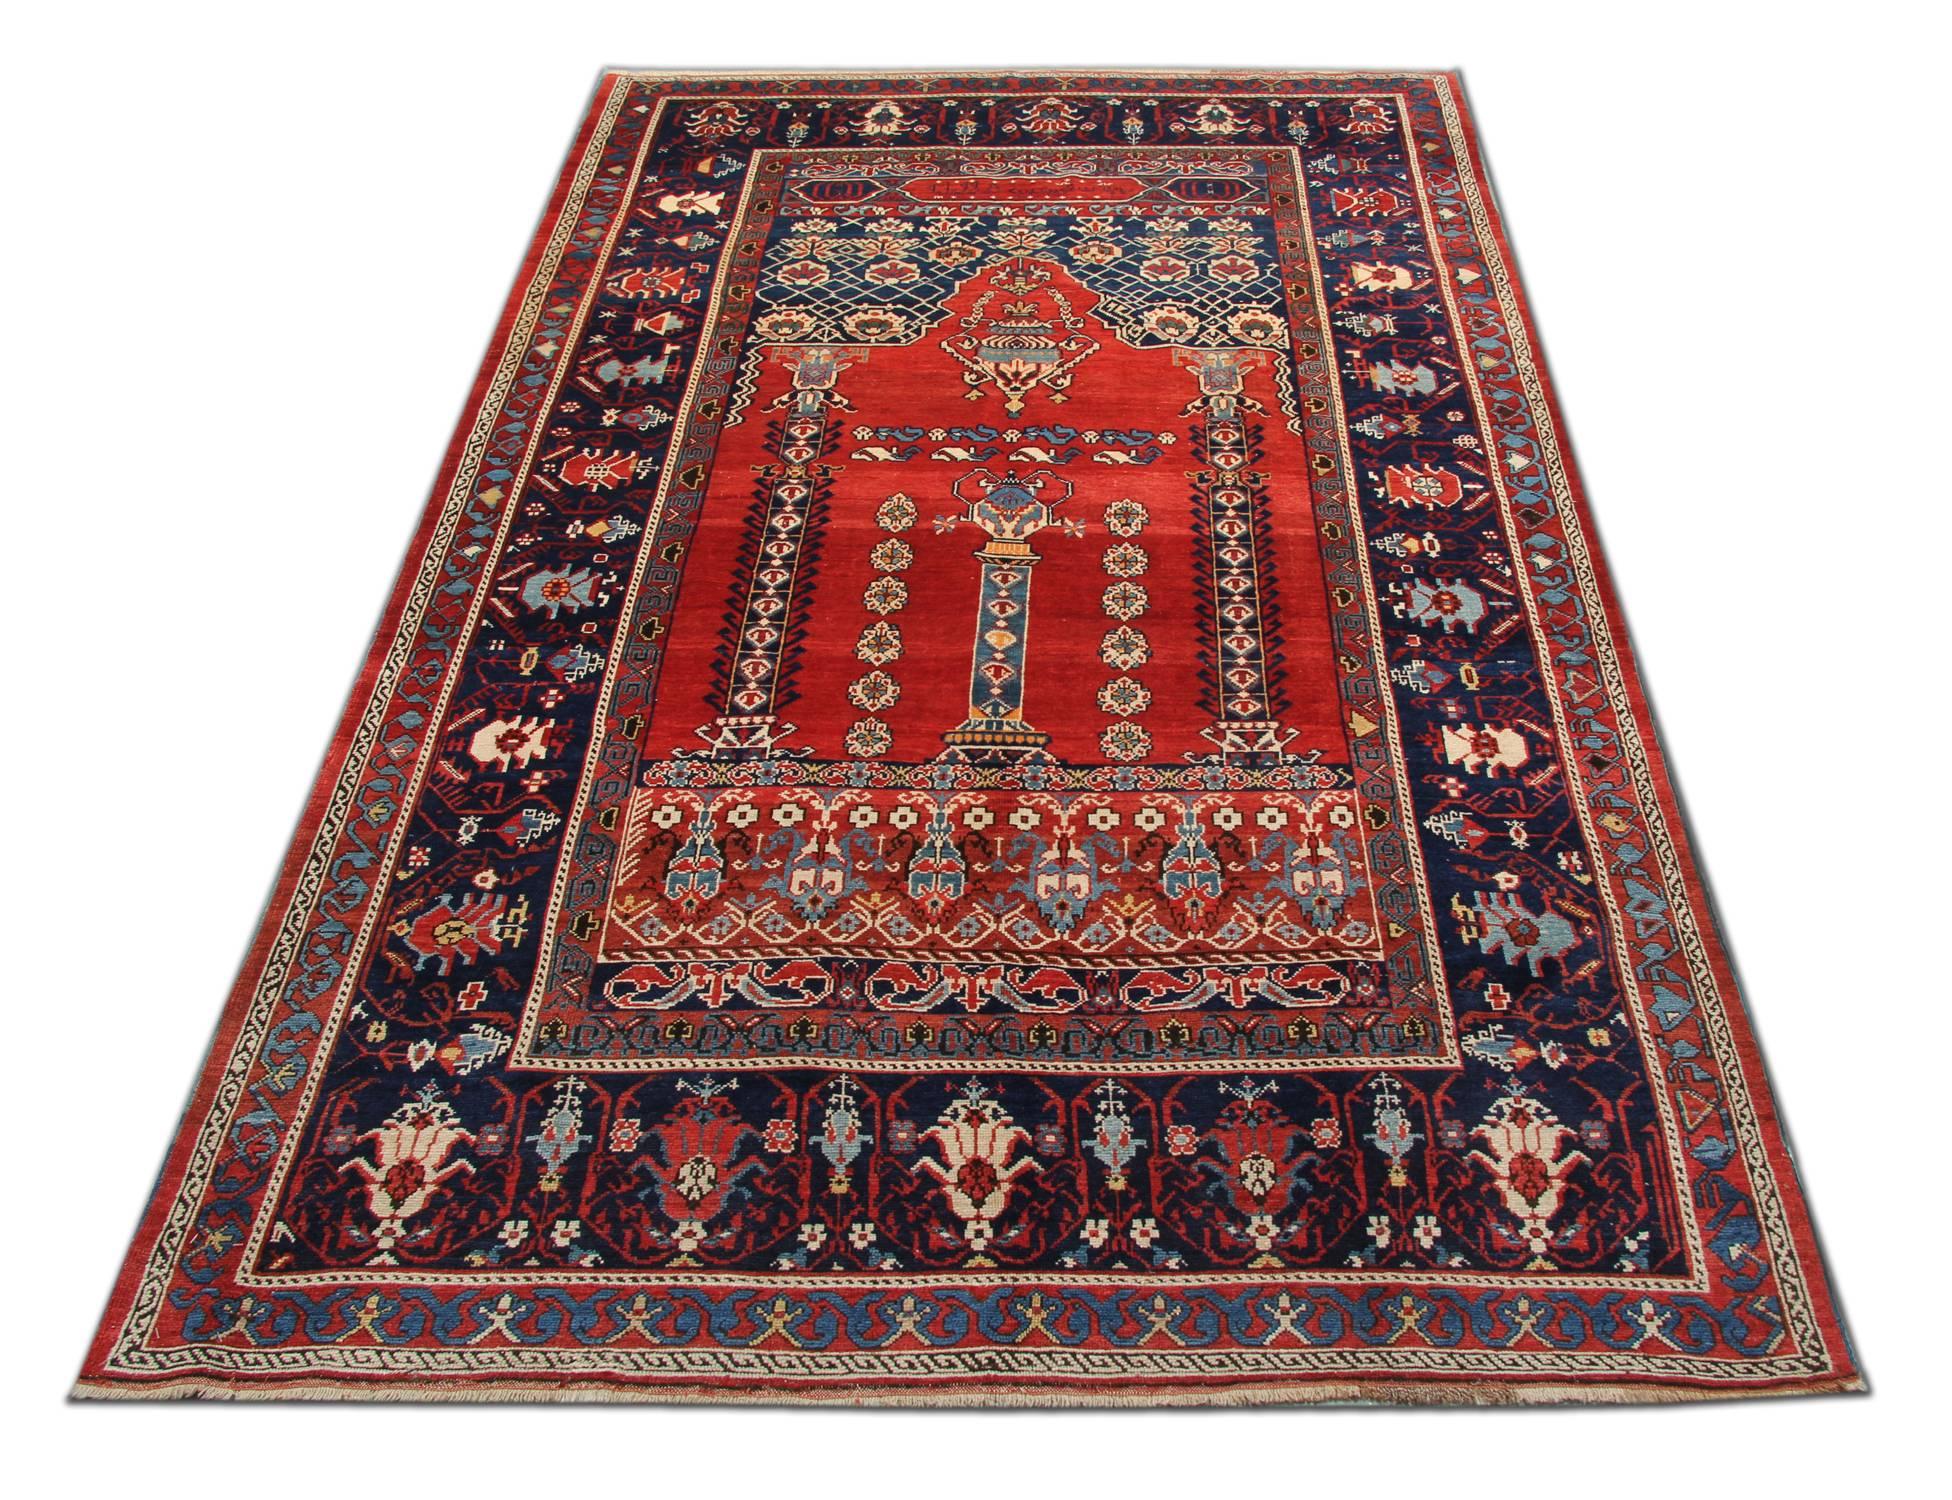 Antique rug Caucasian Kazak, circa 1900-1910, oriental rugs design. Fantastic Patterned rugs from the 19th century using vibrant colors and geometric designs and can be a very elegant rug for part of the home decor as a living room rugs or hallways